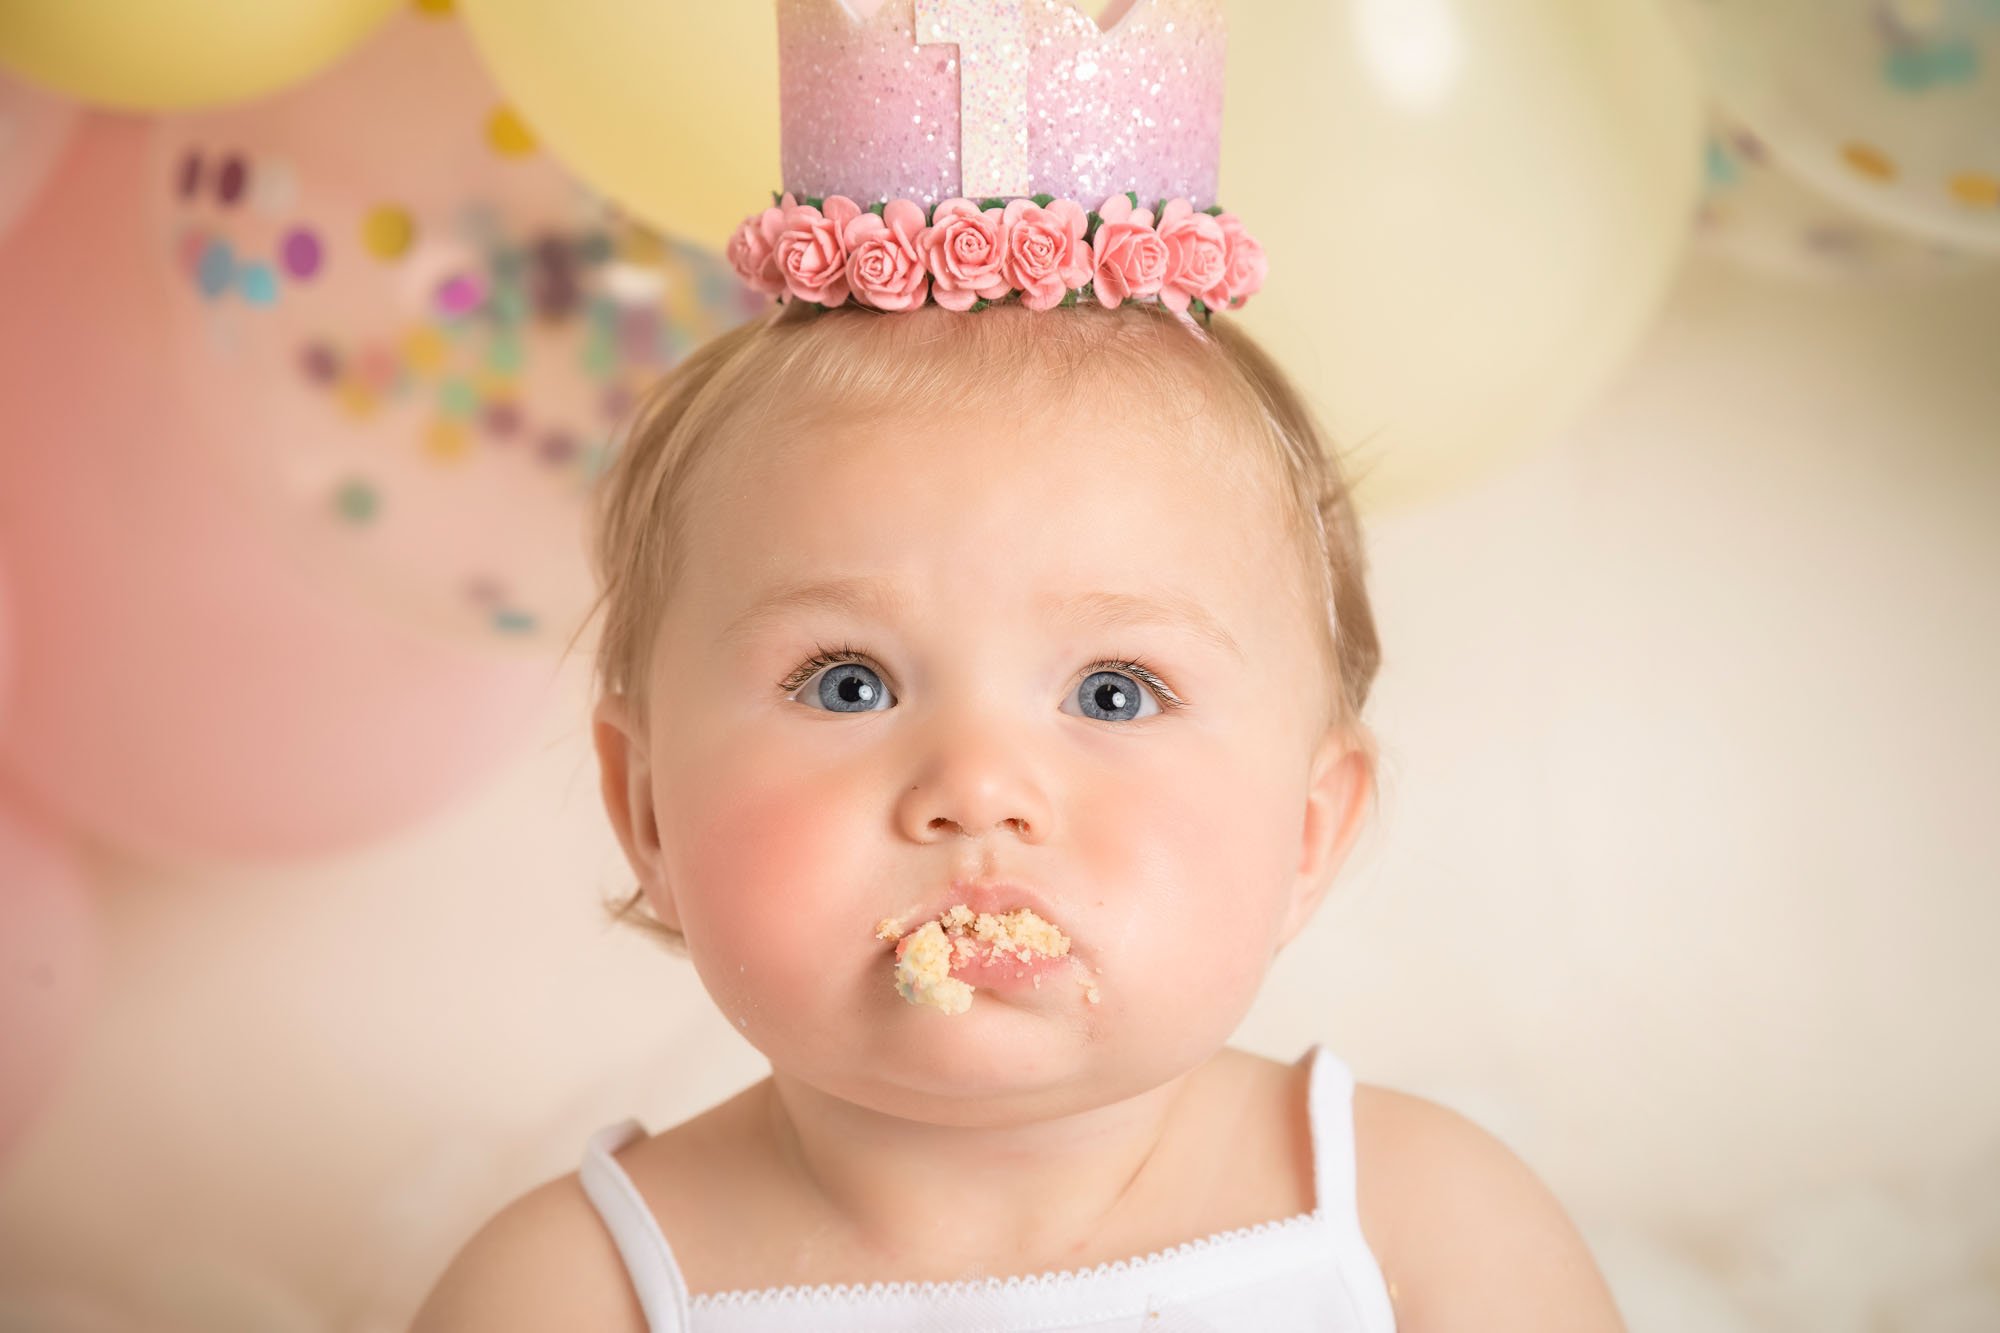 cakesmash-photography-in-leeds-baby-girl-with-mouth-full-of-cake-pastel-rainbow-theme.jpg